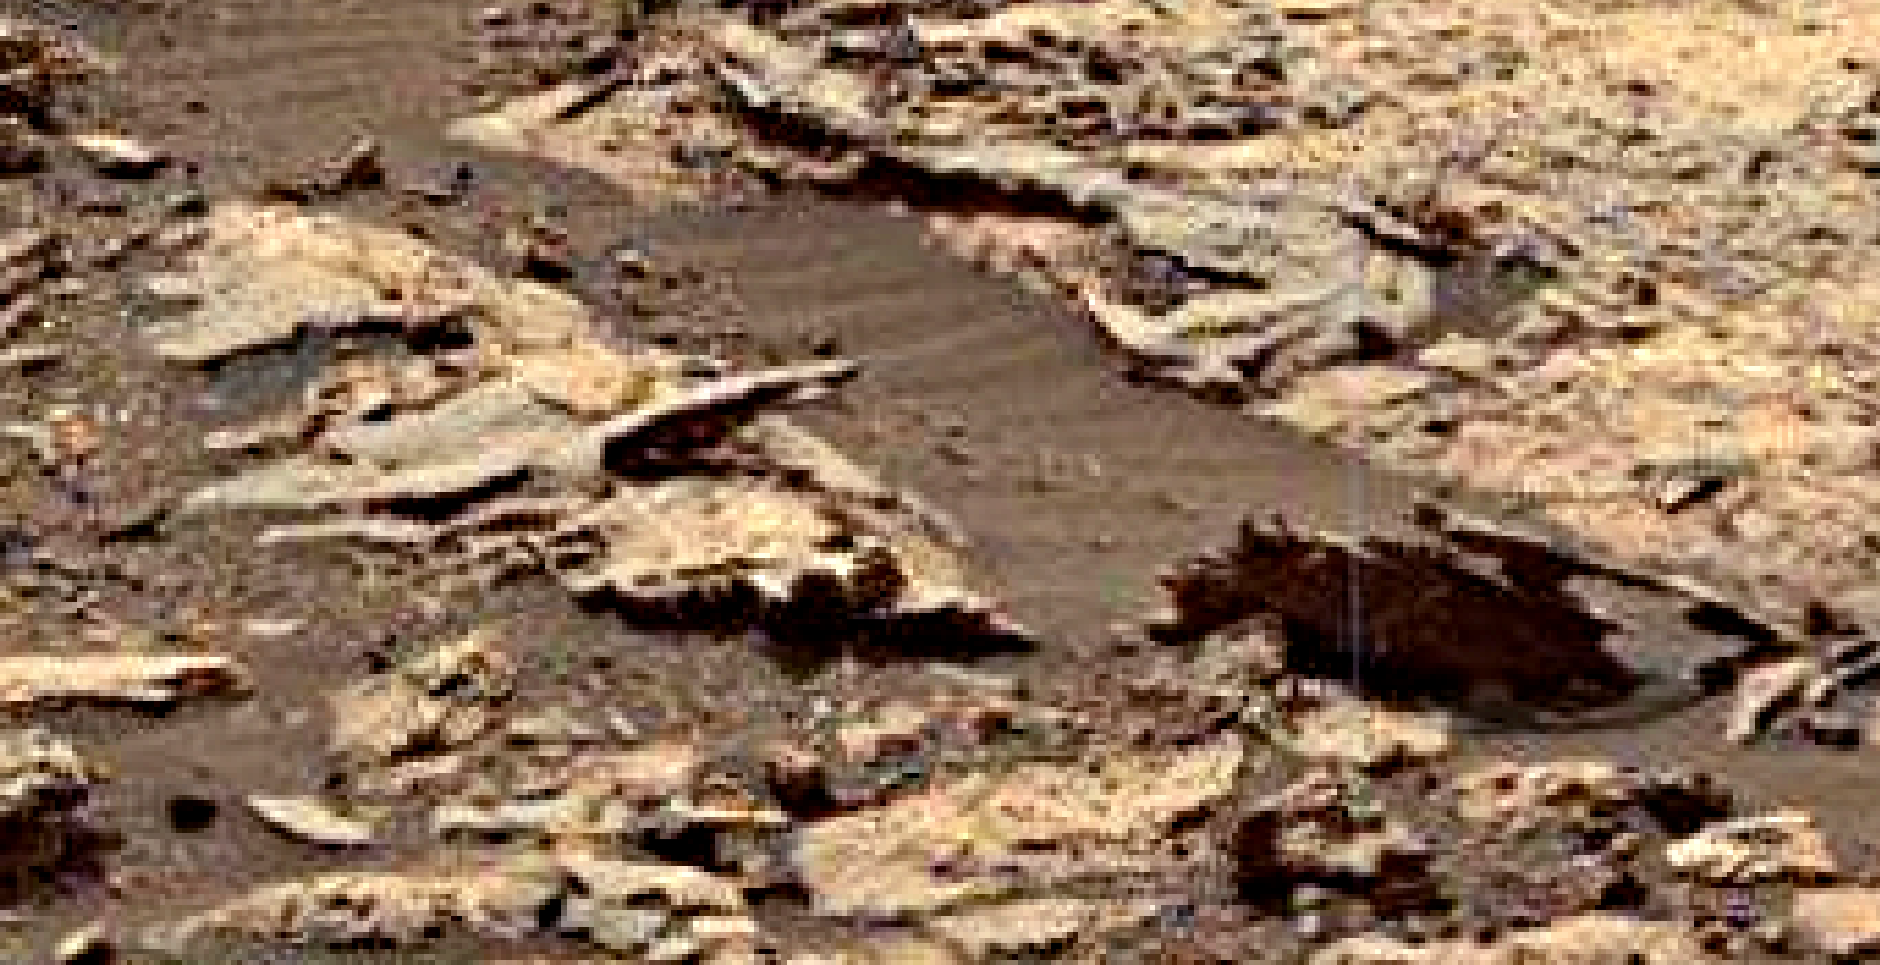 mars-sol-1485-anomaly-artifacts-4-was-life-on-mars